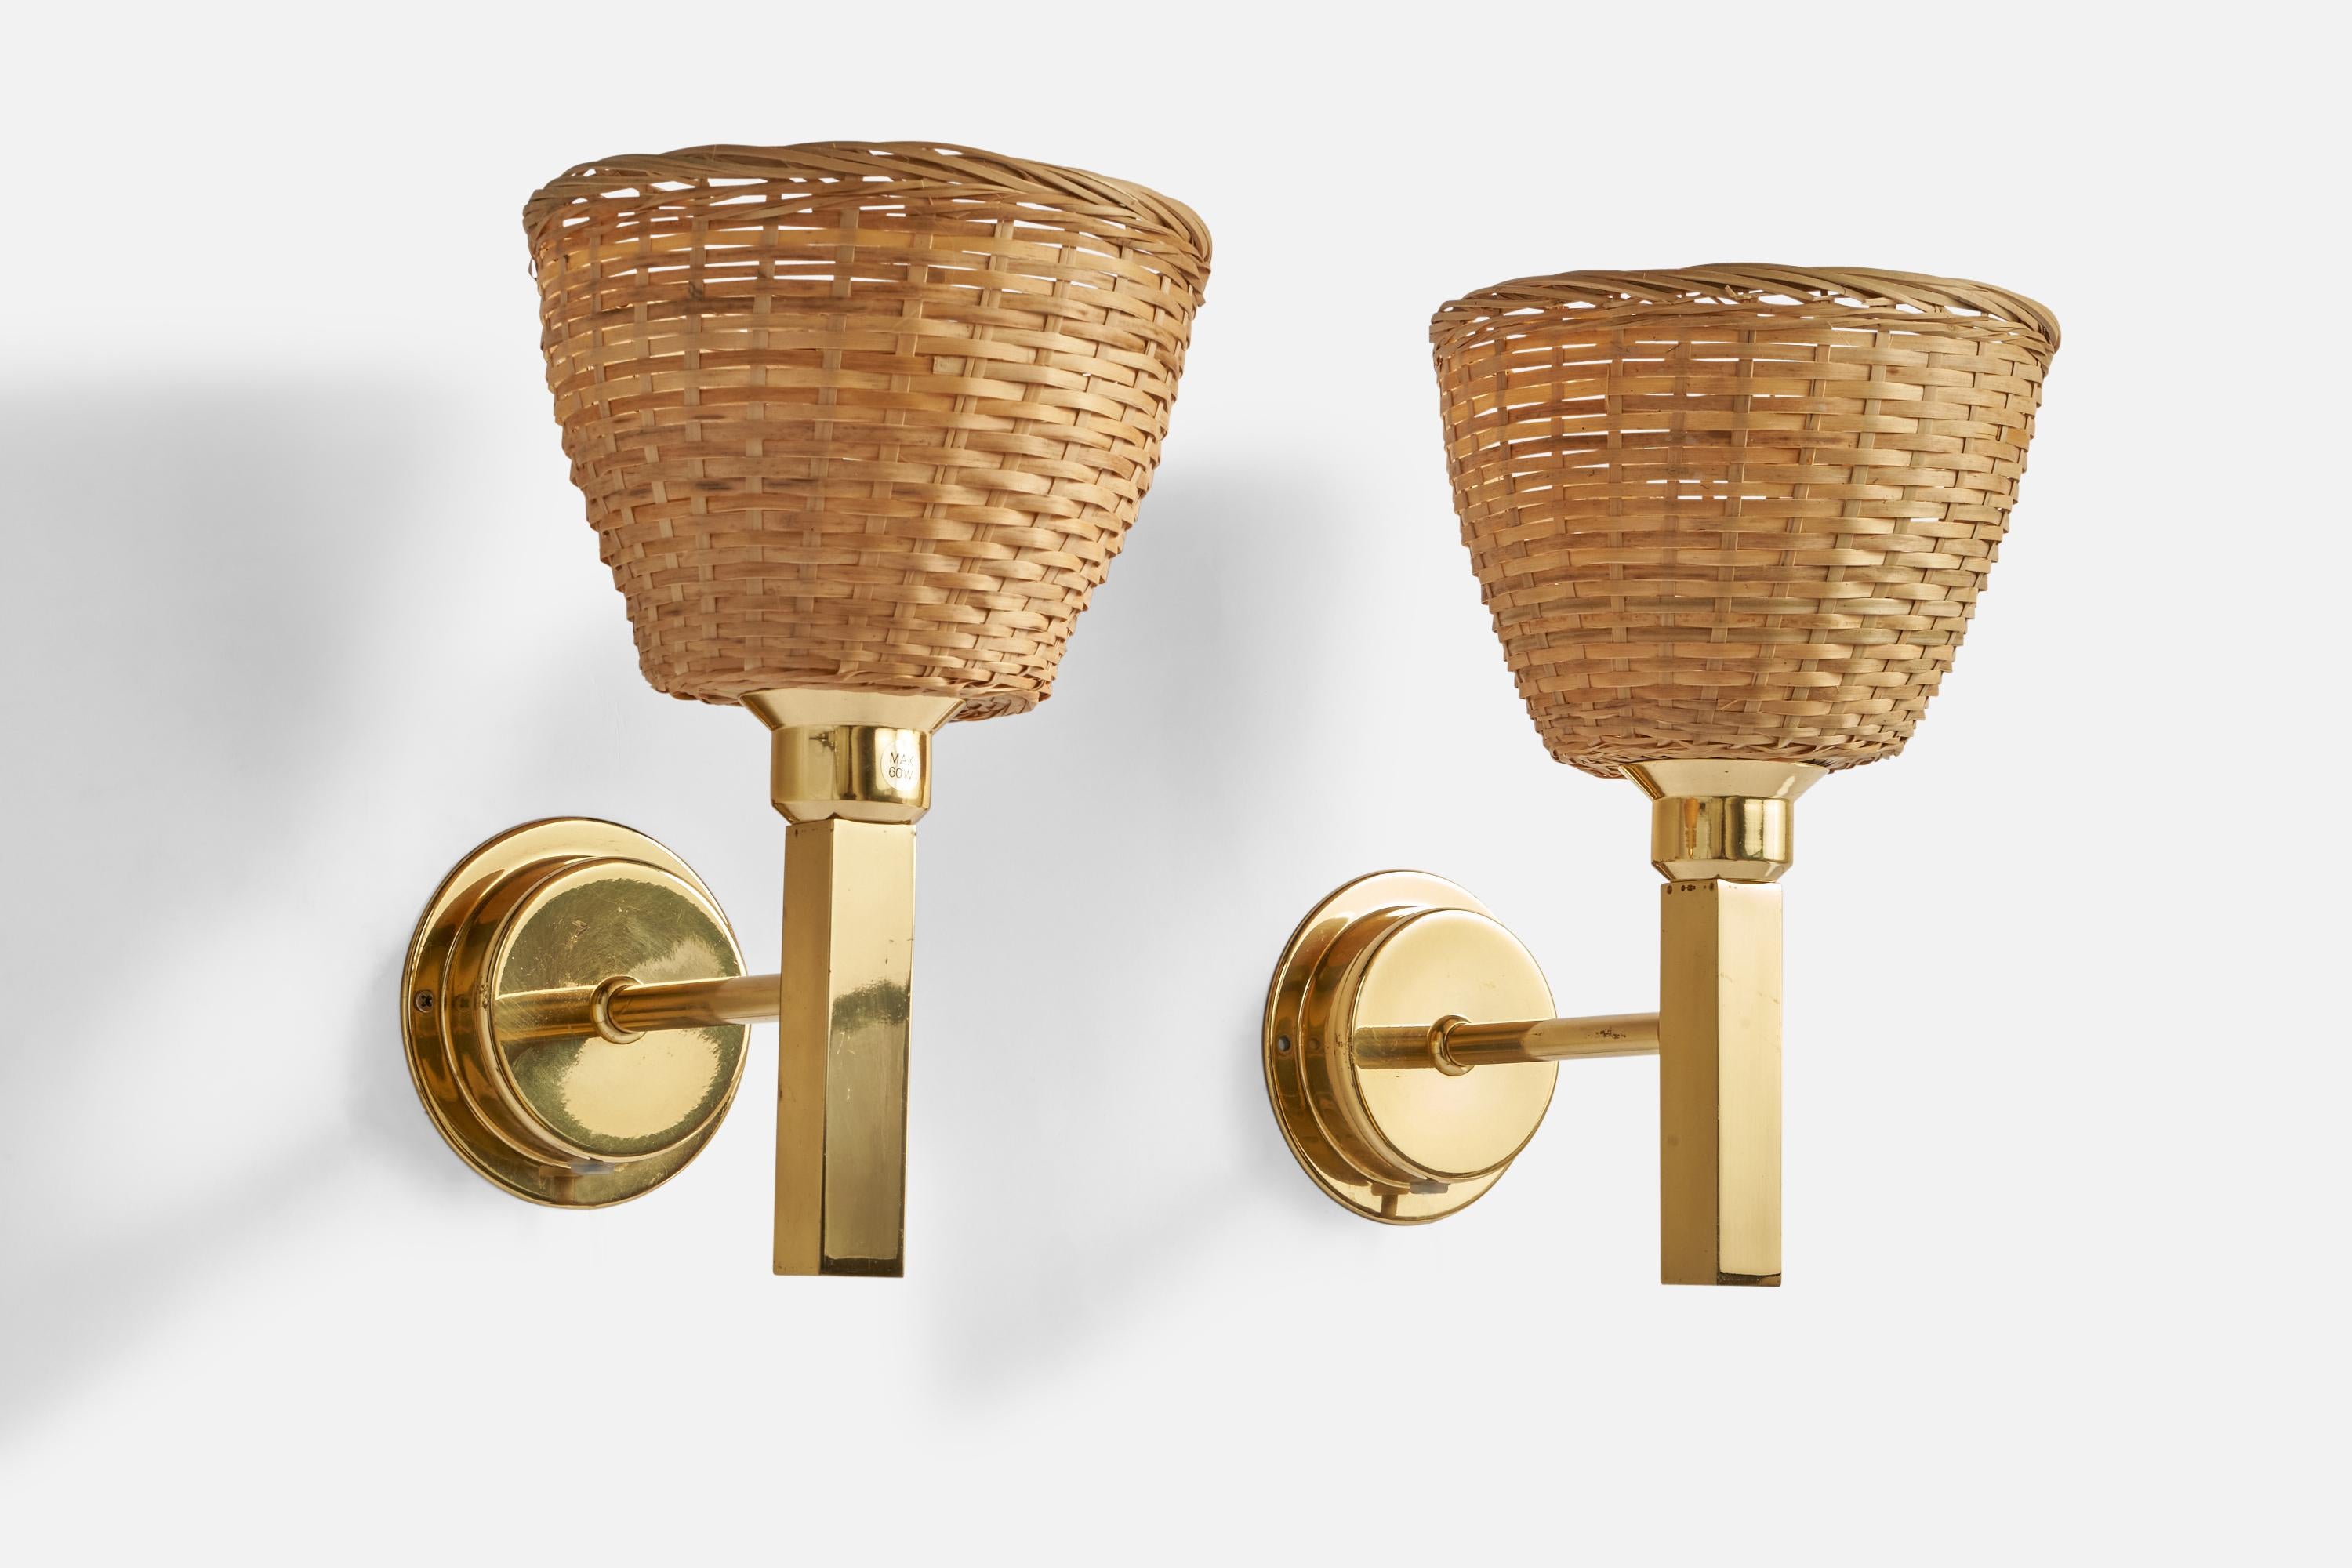 A pair of brass and rattan wall lights designed and produced by Ewå Värnamo, Sweden, 1970s.

Overall Dimensions (inches): 10.5” H x 7” W x 8.5” D
Back Plate Dimensions (inches): 4.25” Diameter x 0.96” Depth
Bulb Specifications: E-26 Bulbs
Number of